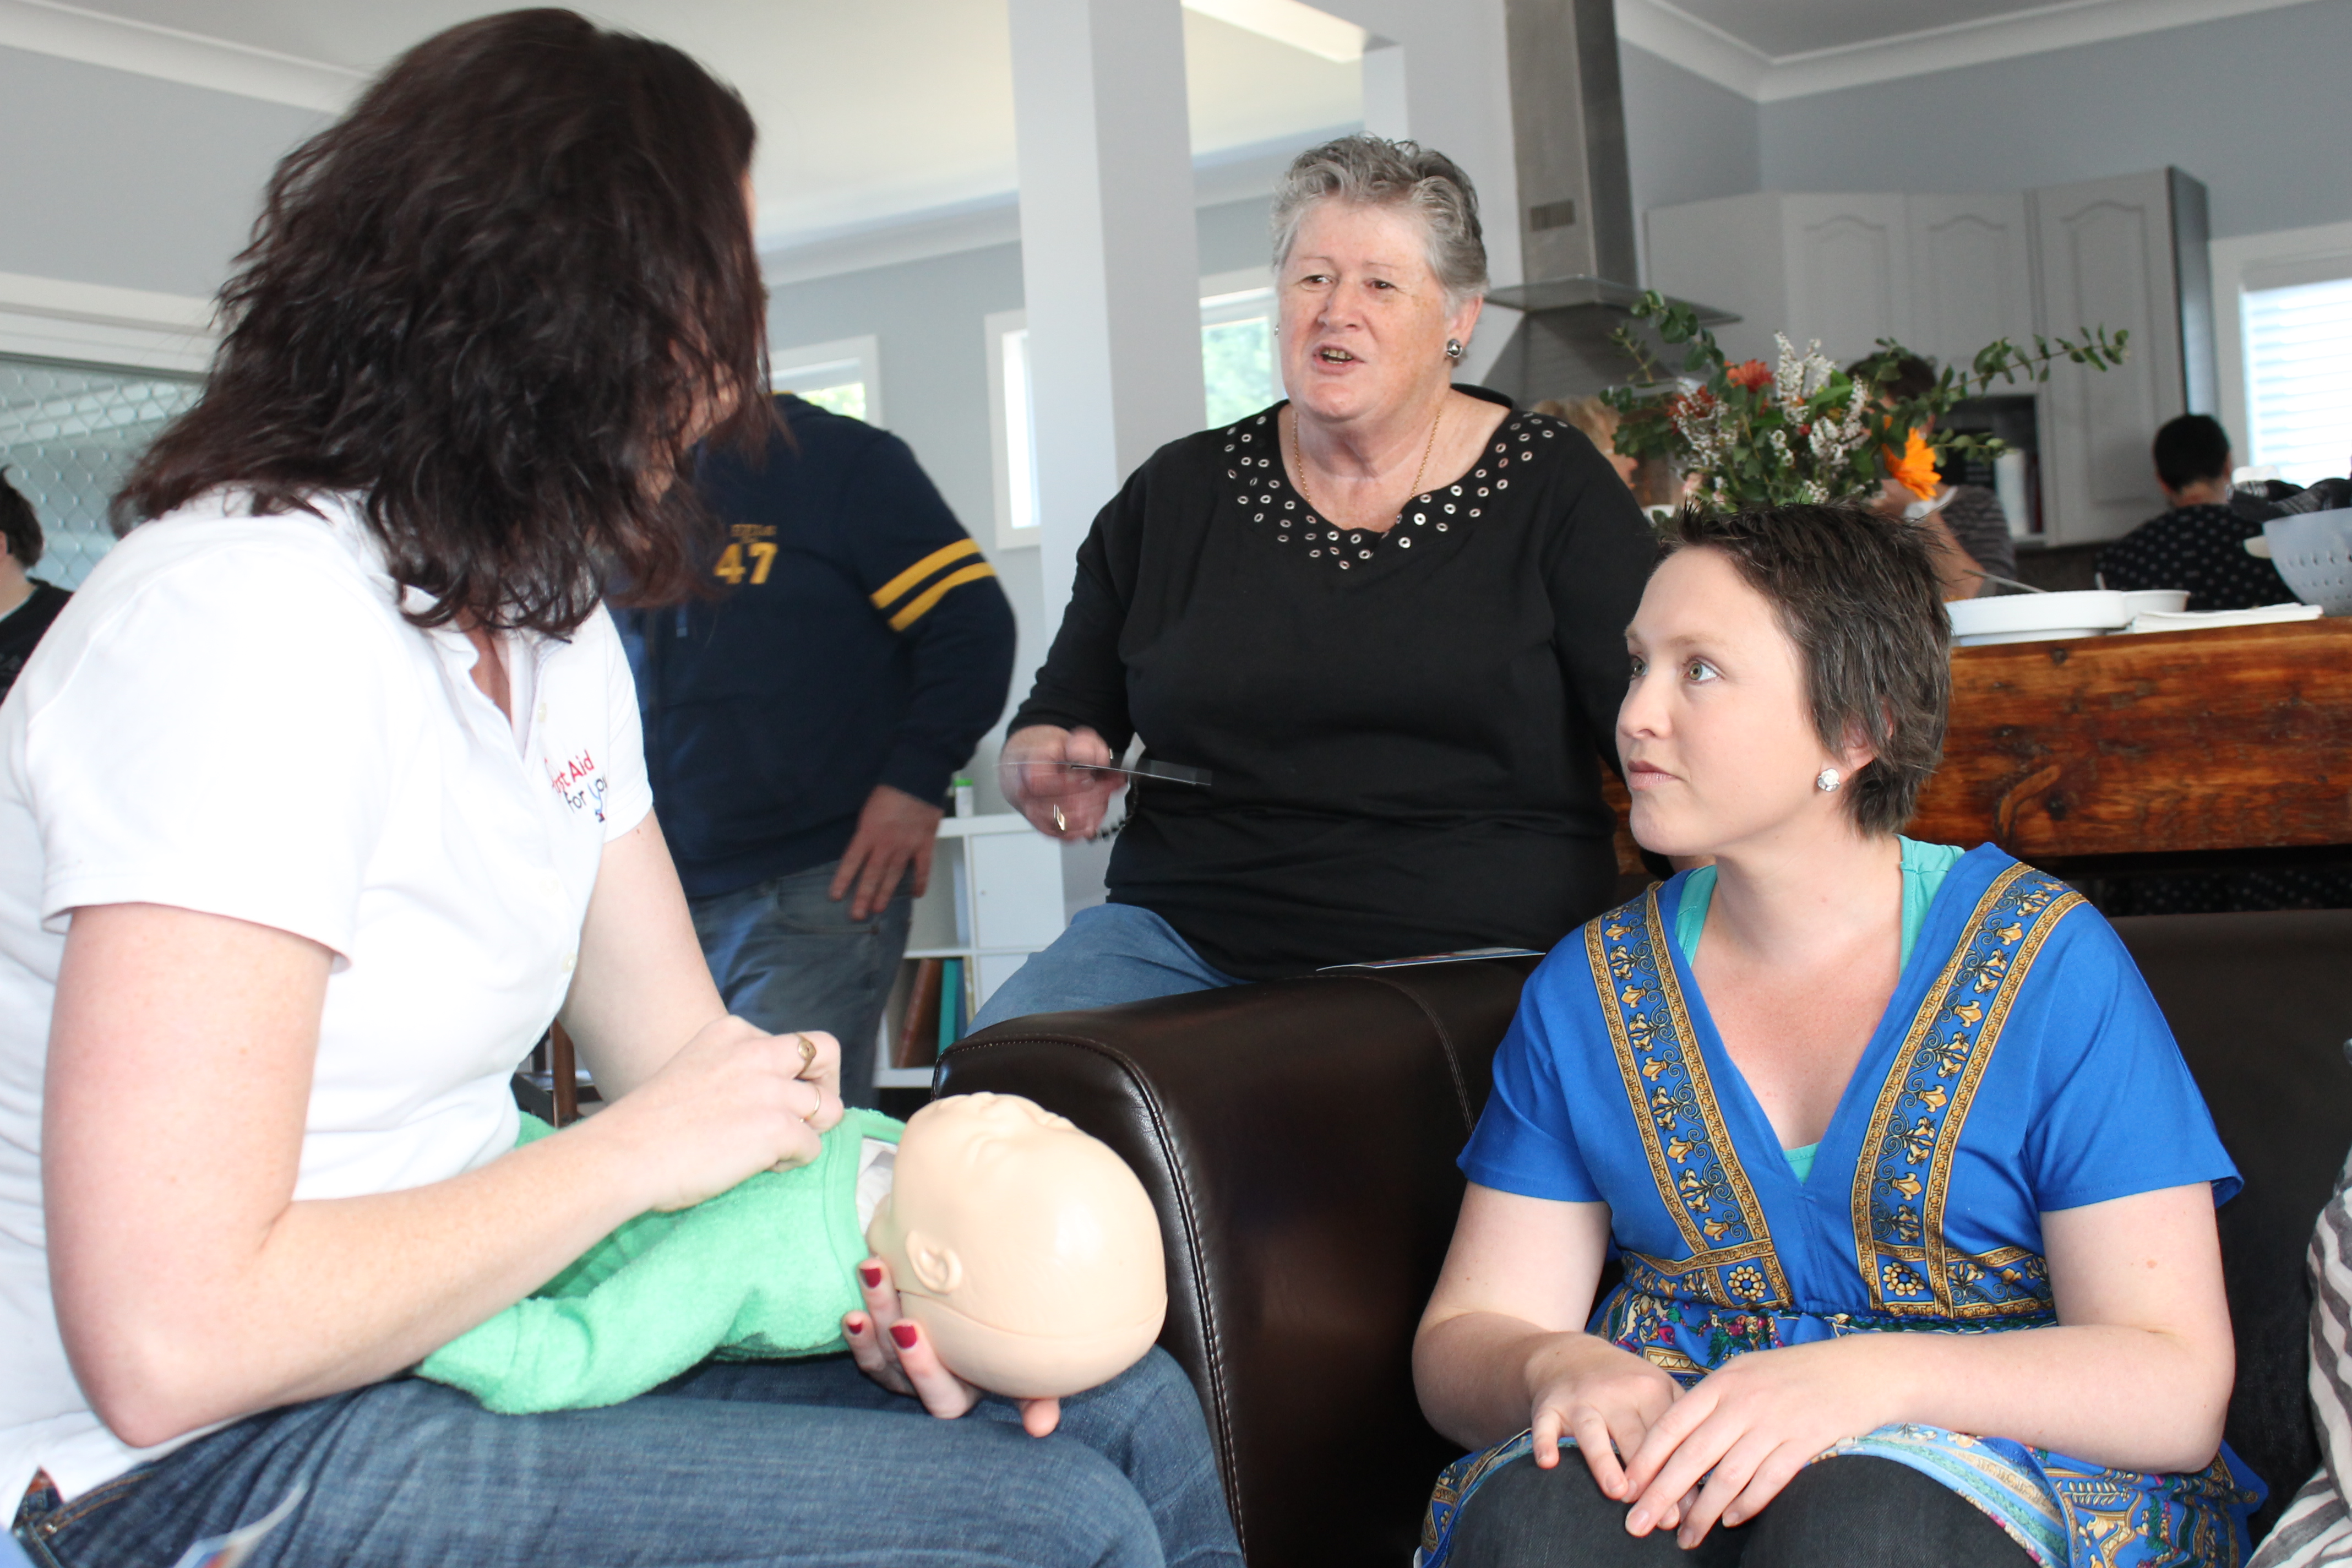 First Aid For You teaching baby CPR at a baby shower